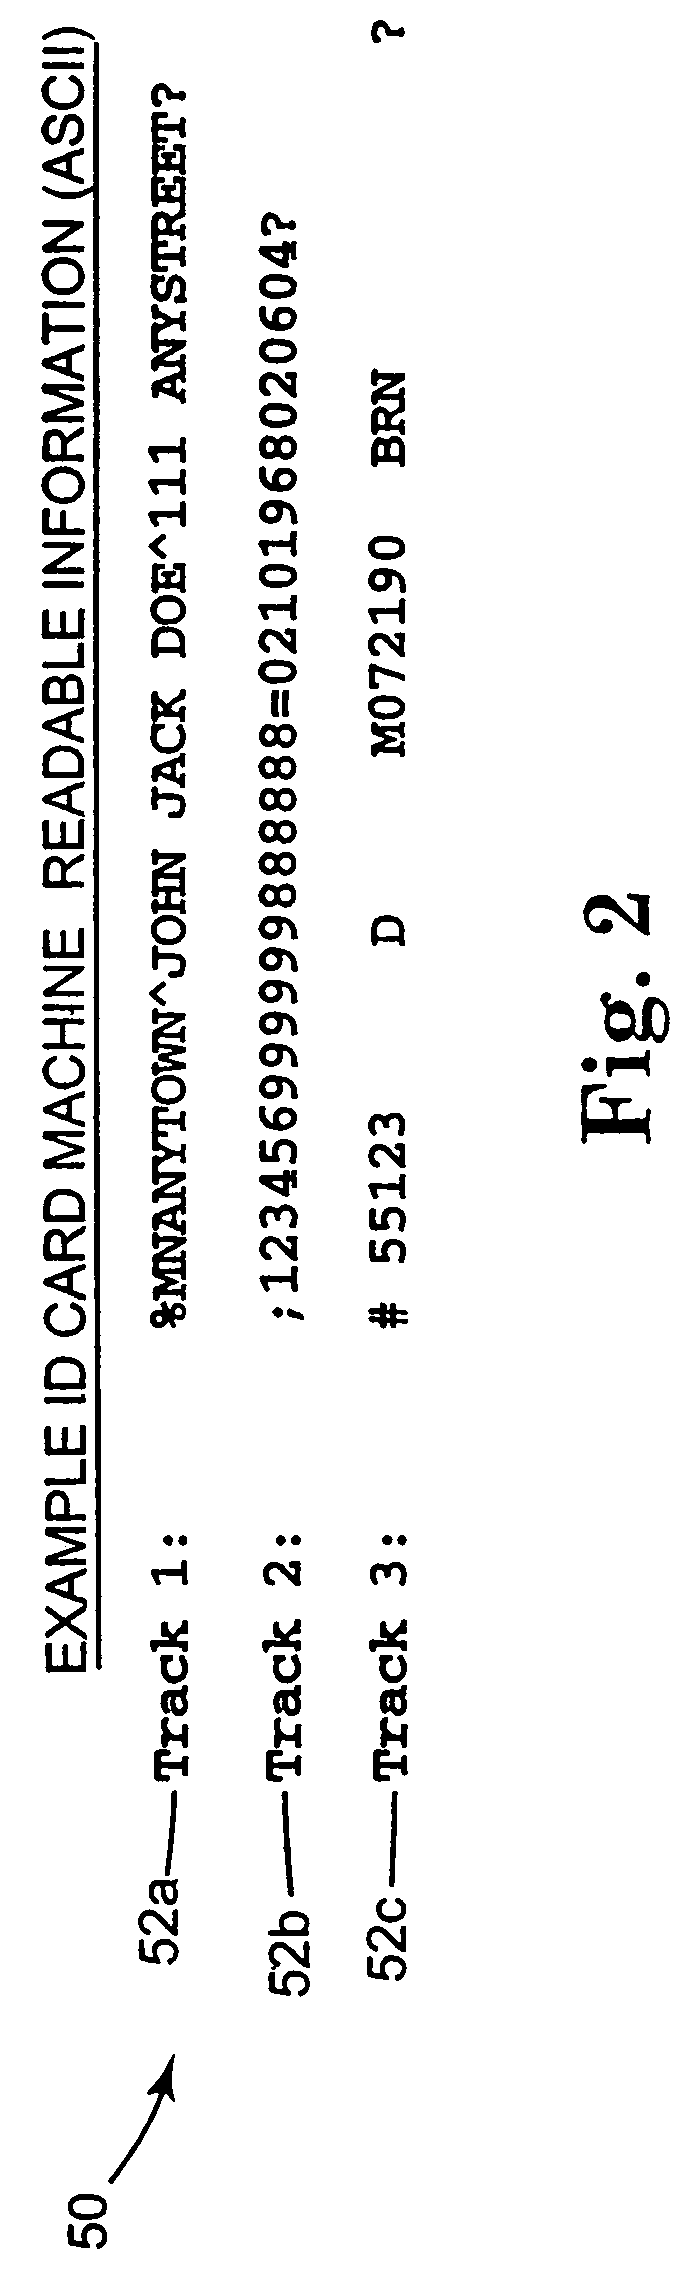 System and method for checkless cash advance settlement